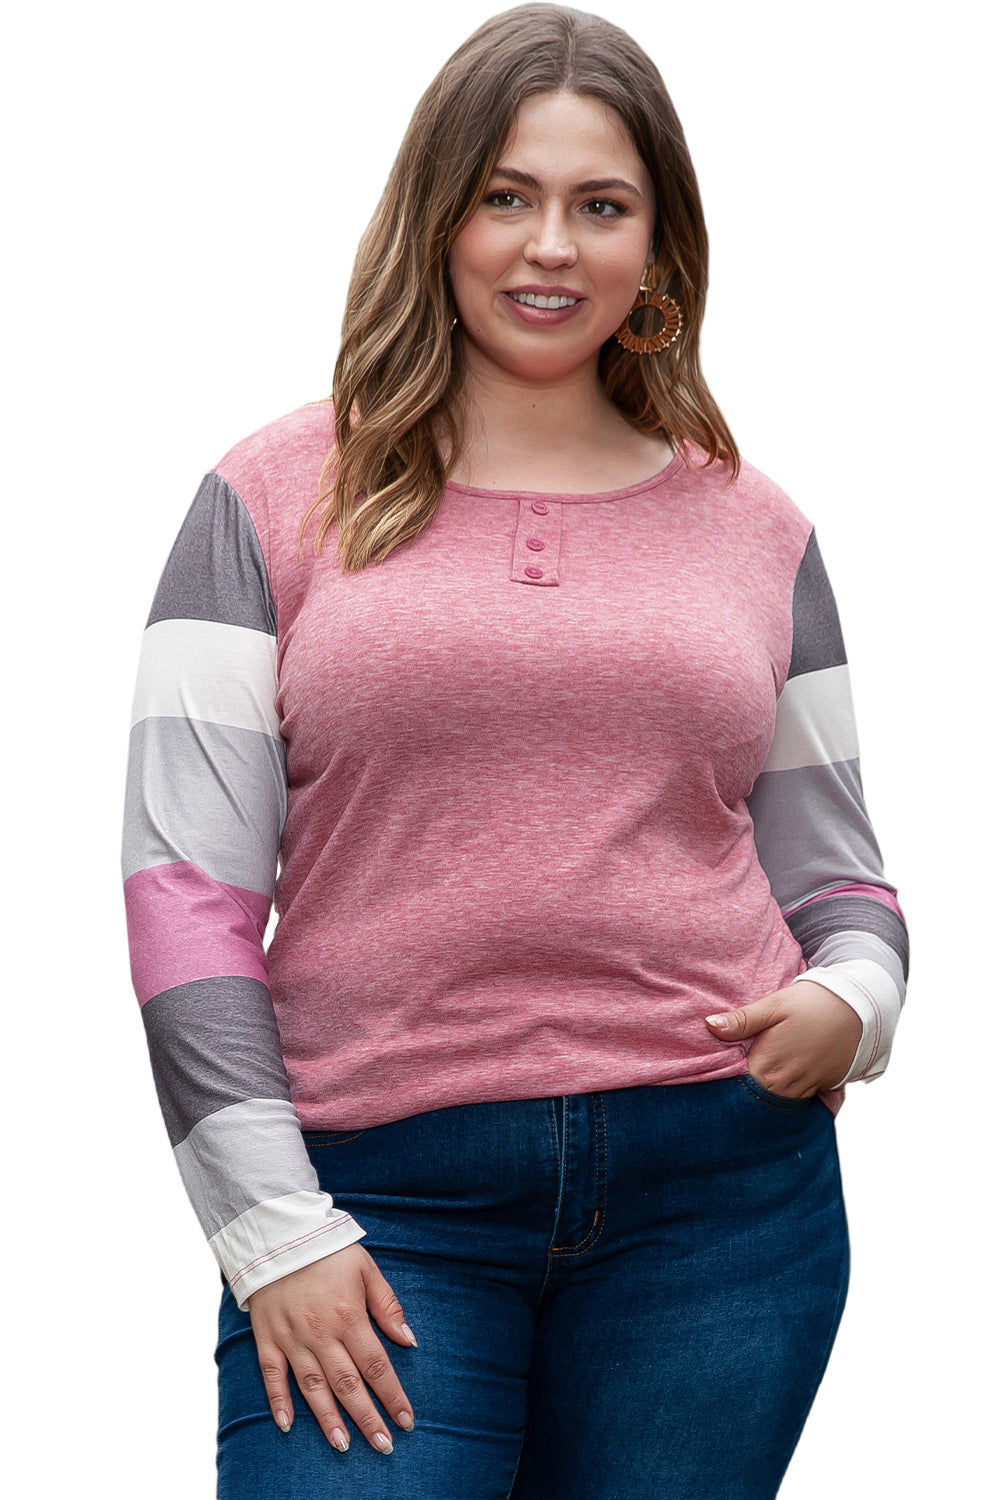 Pink Candy Striping Sleeve Plus Size Top